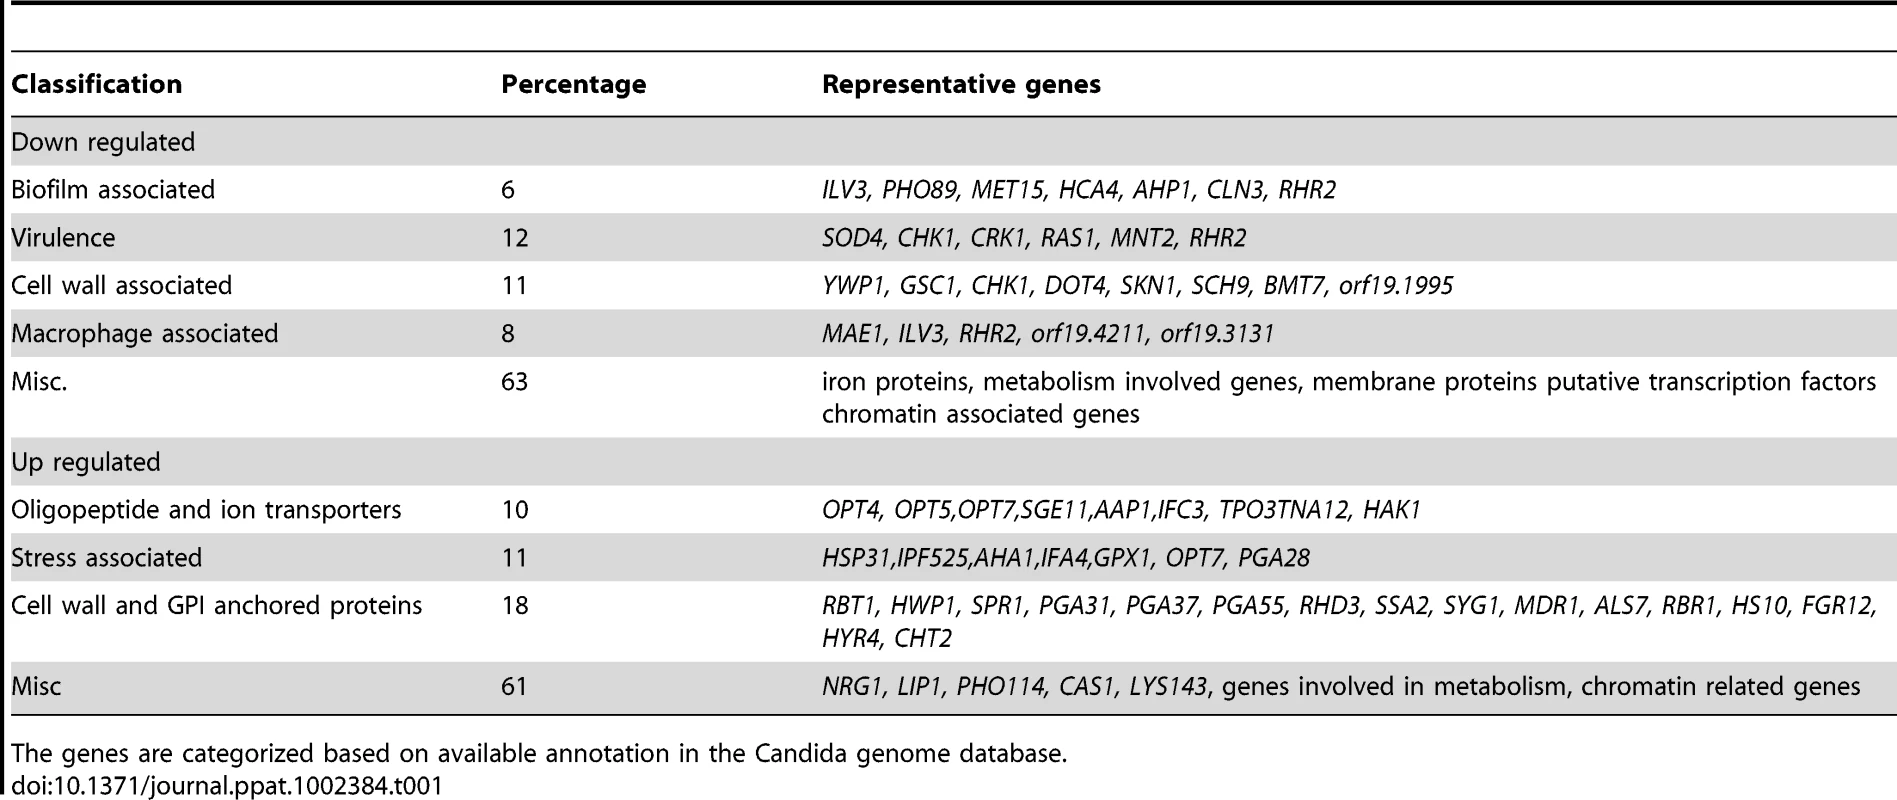 The list of representative genes differentially expressed in <i>C. albicans gal102Δ/Δ</i> as compared to the WT.